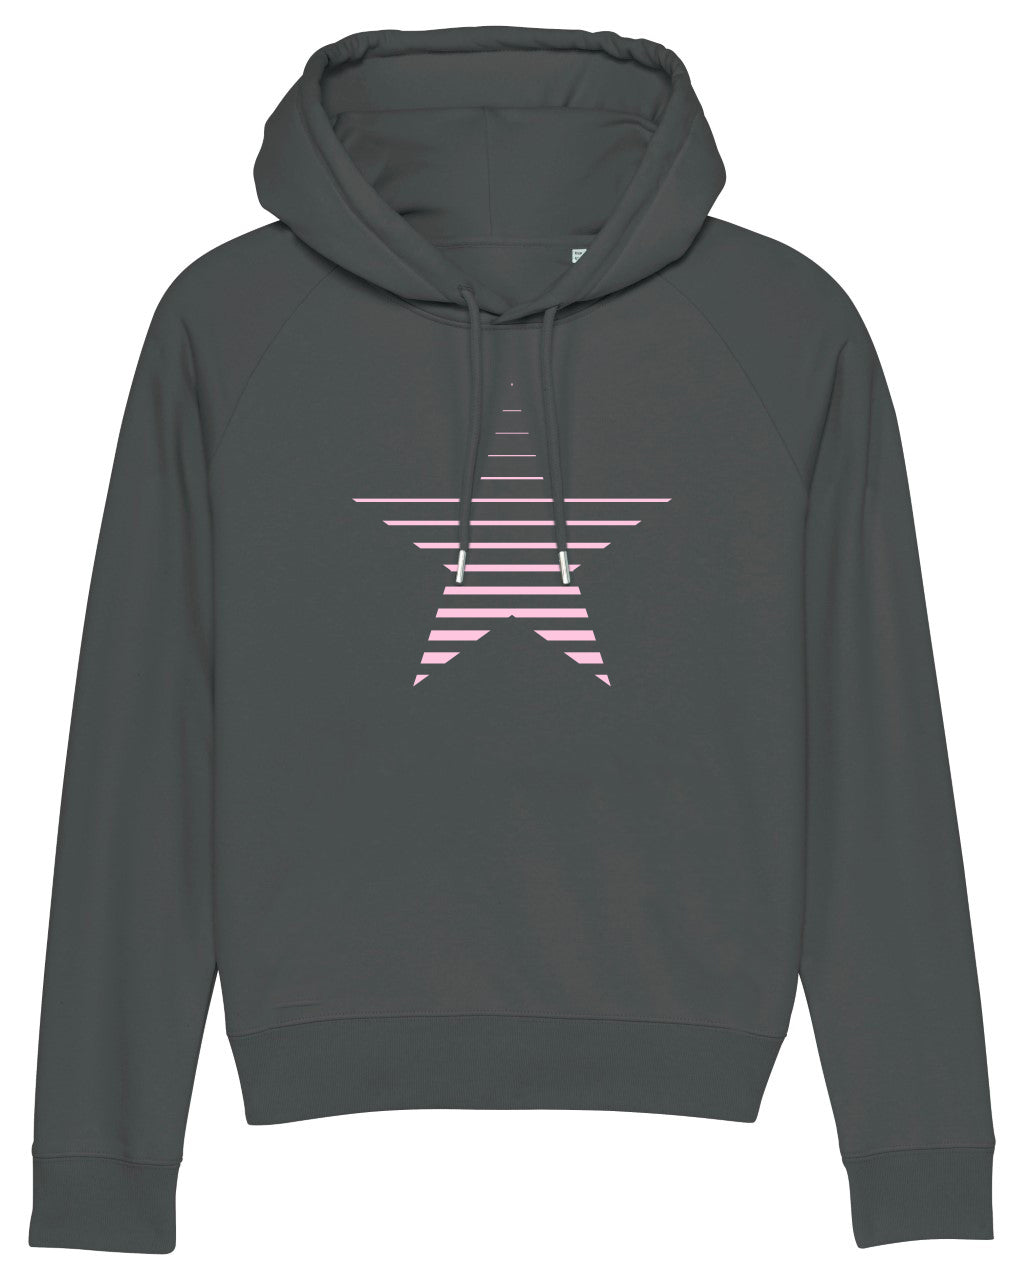 Anthracite Striped Star Hoodie - MADE TO ORDER